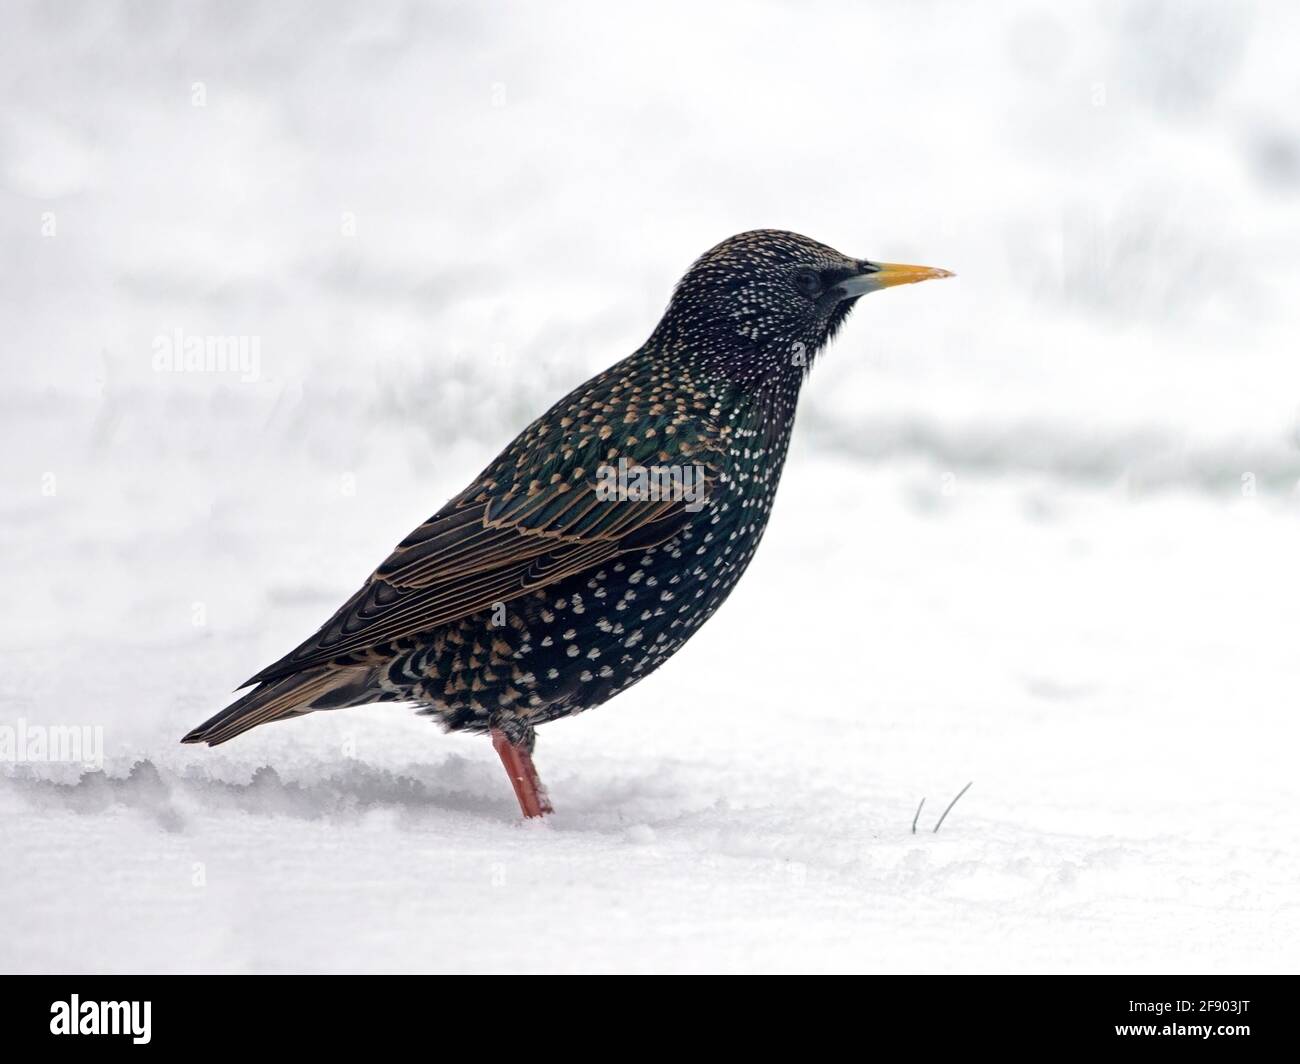 Common starling standing in snow Stock Photo